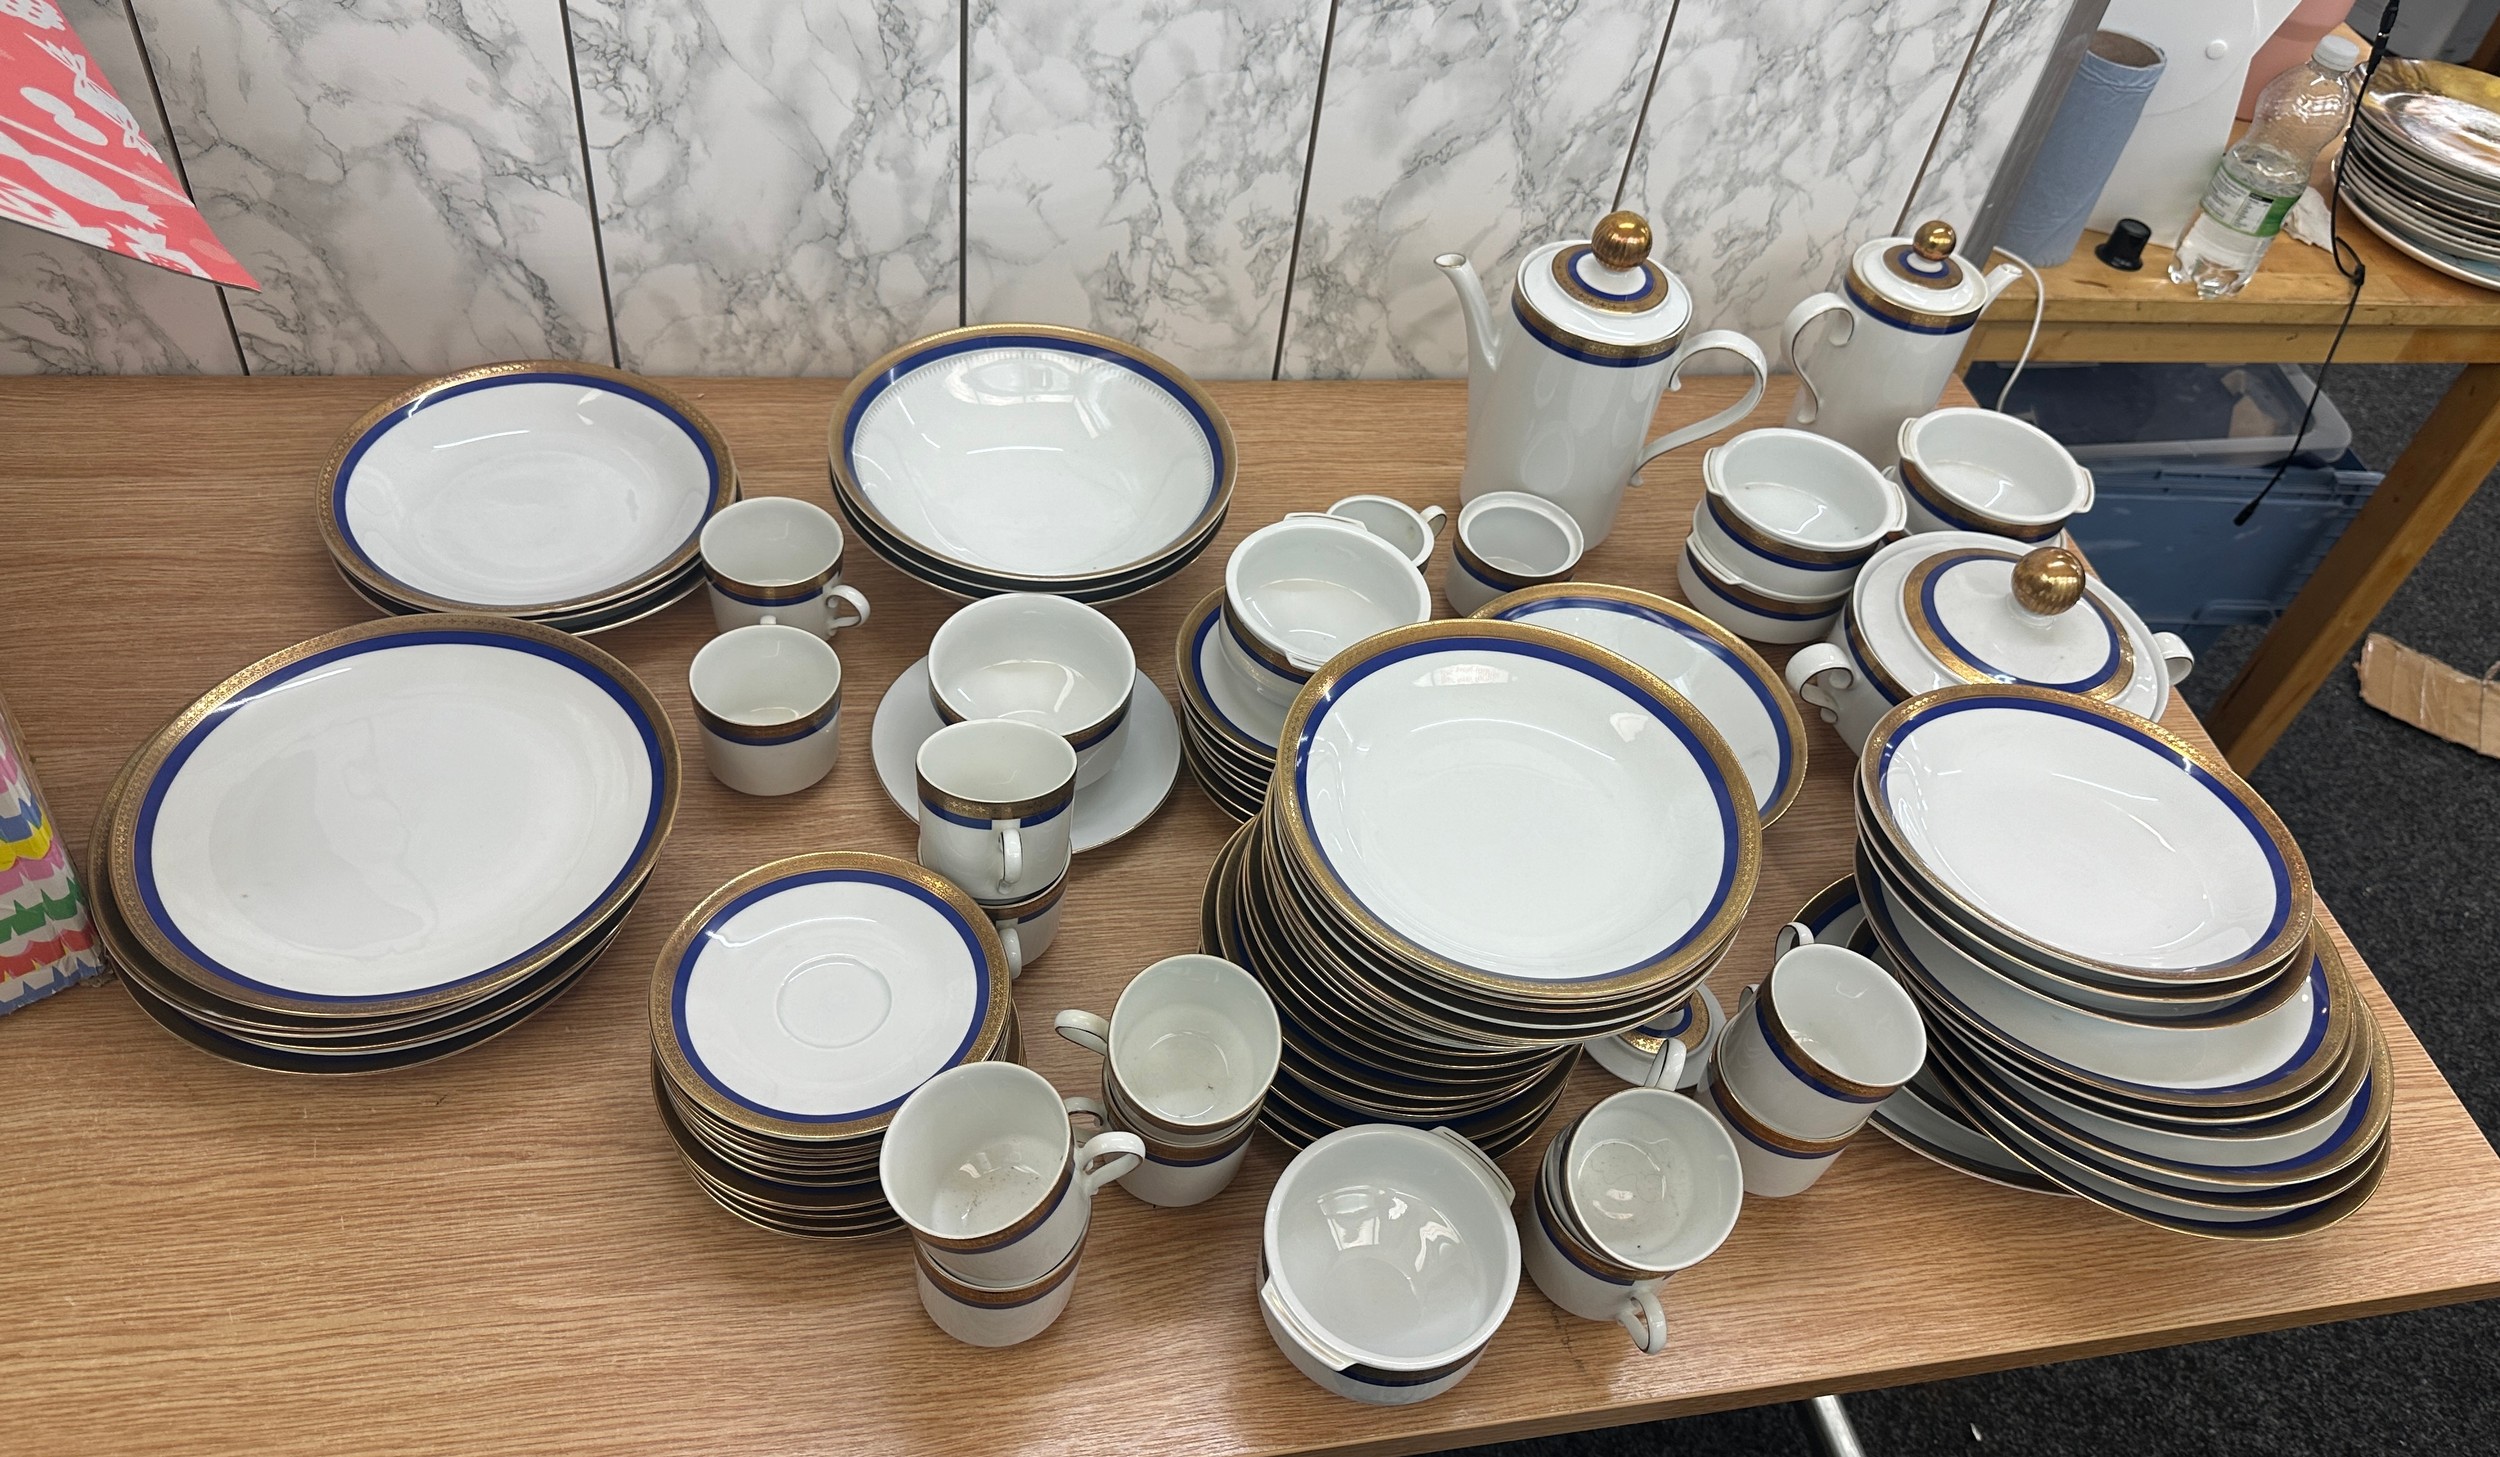 Large selection of Winterling part dinner service